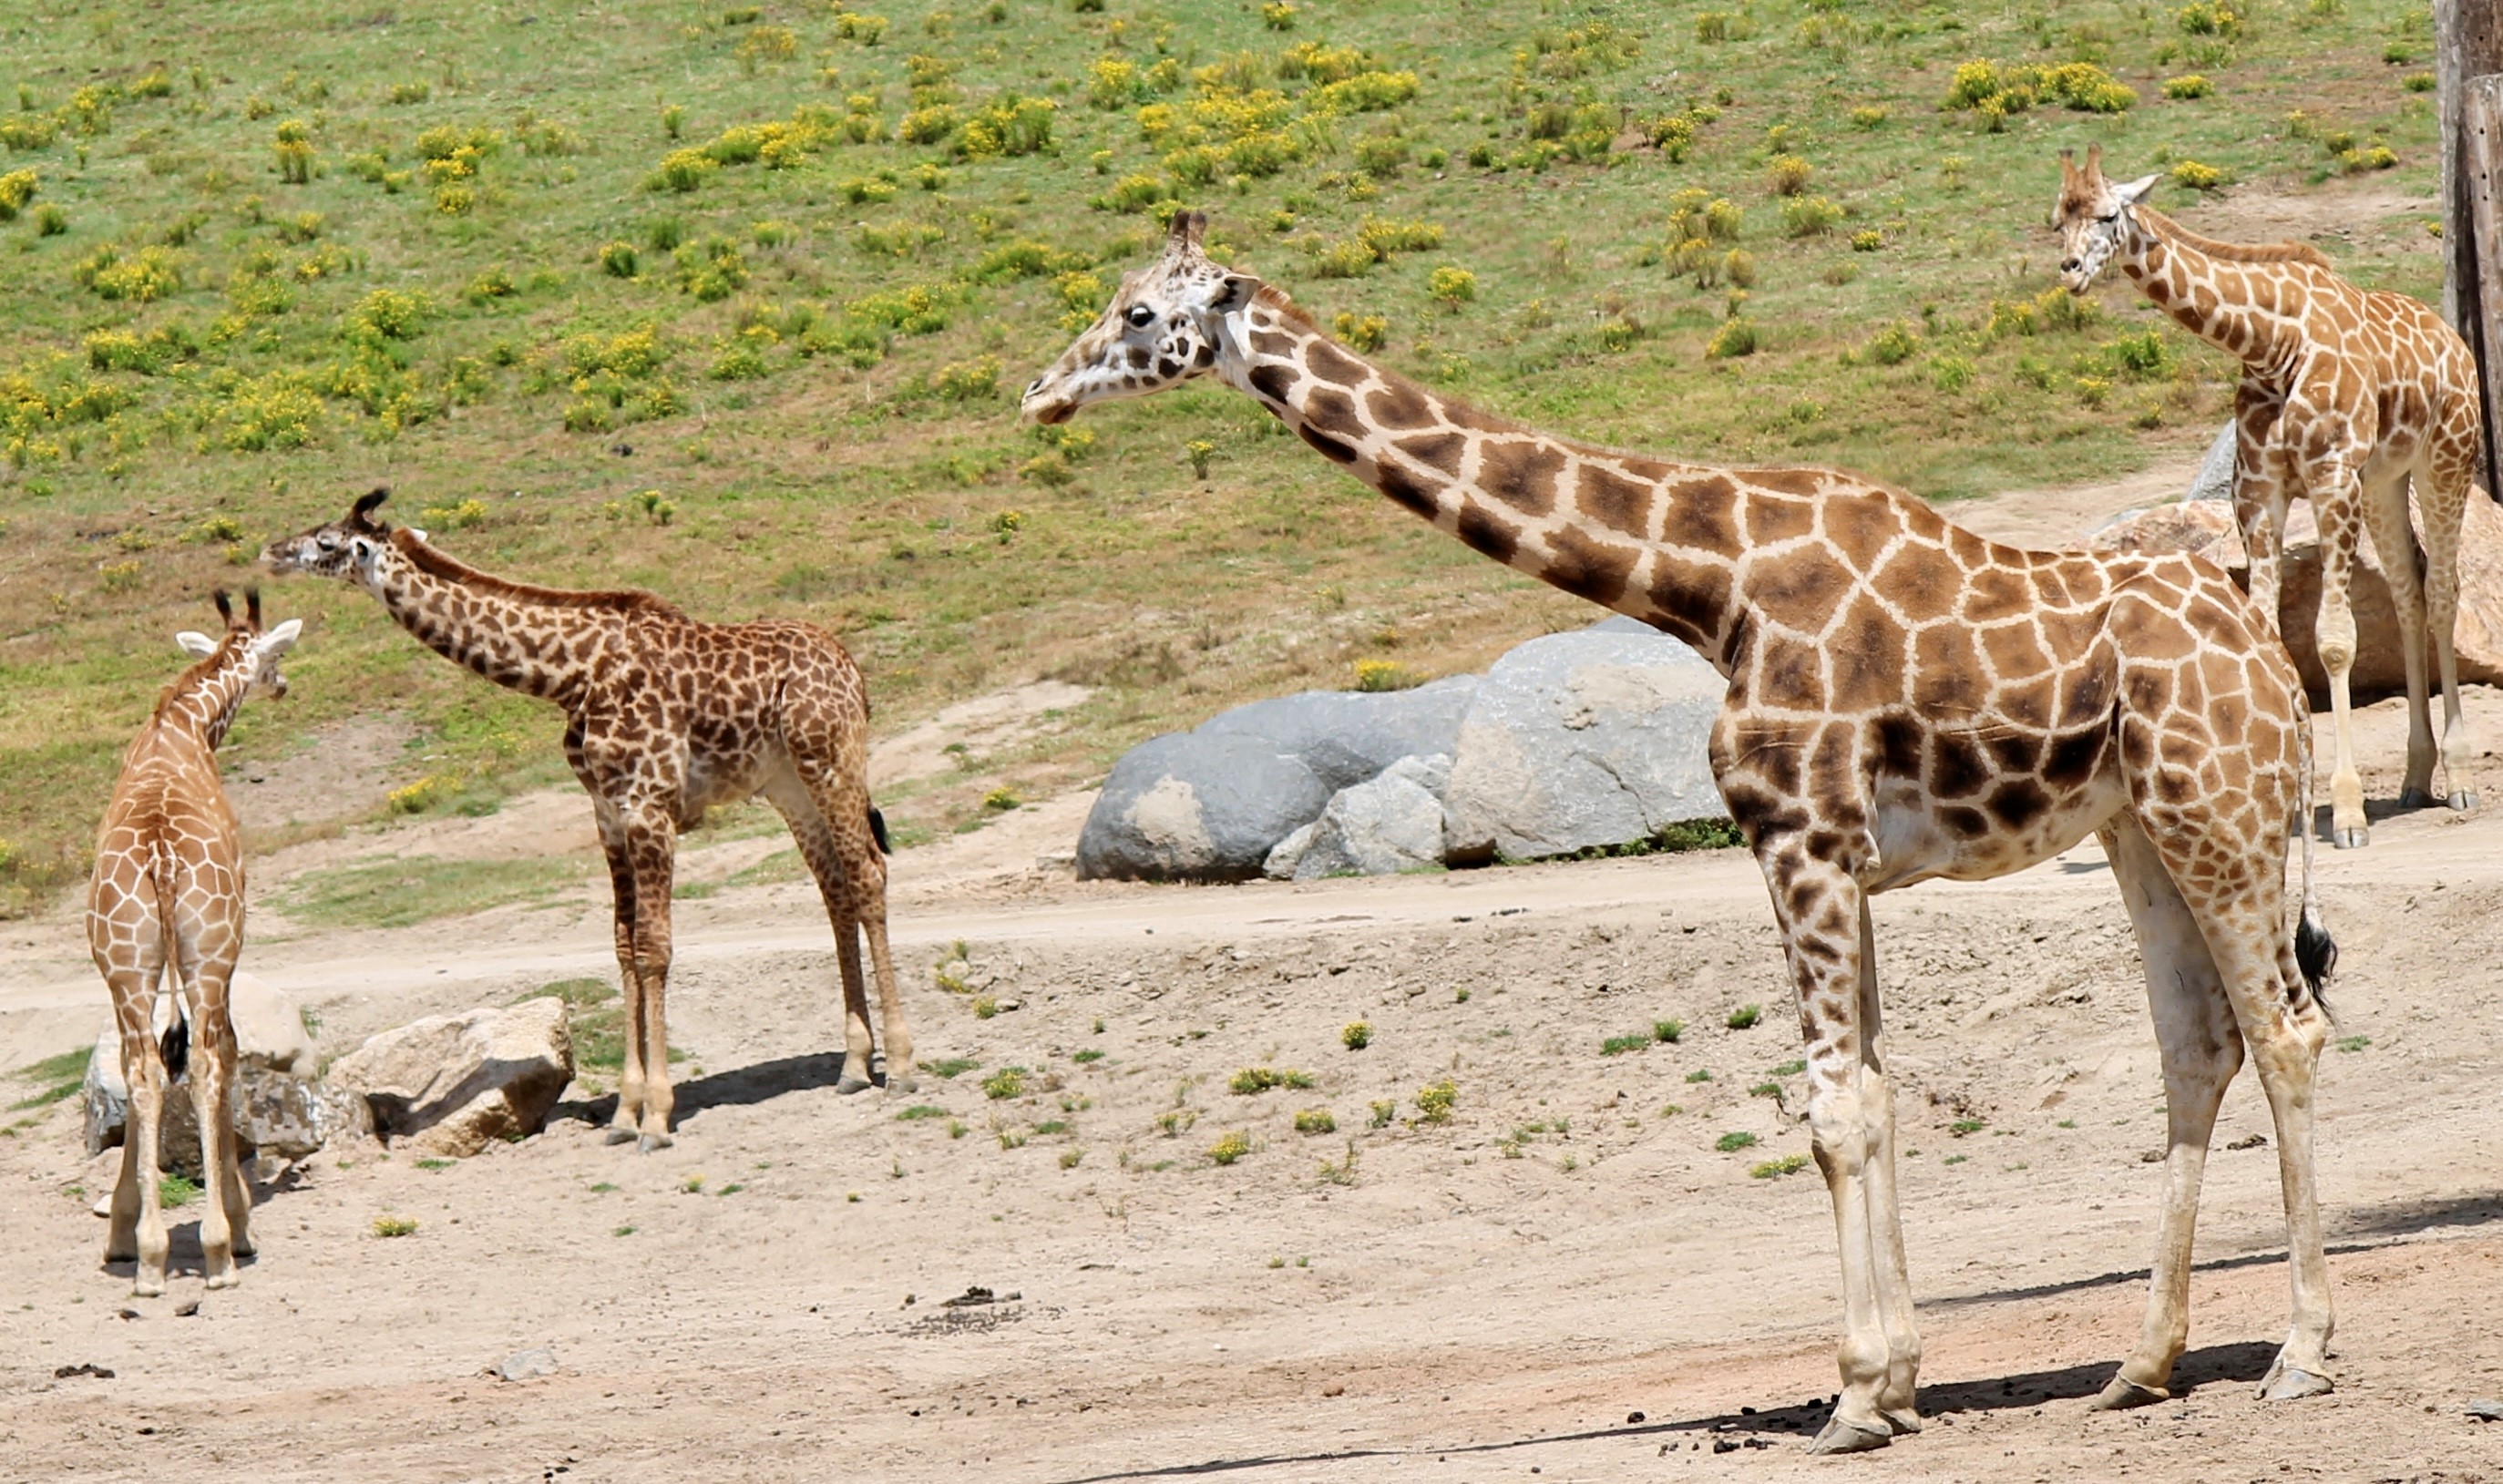 Two adult and two juvenile giraffes